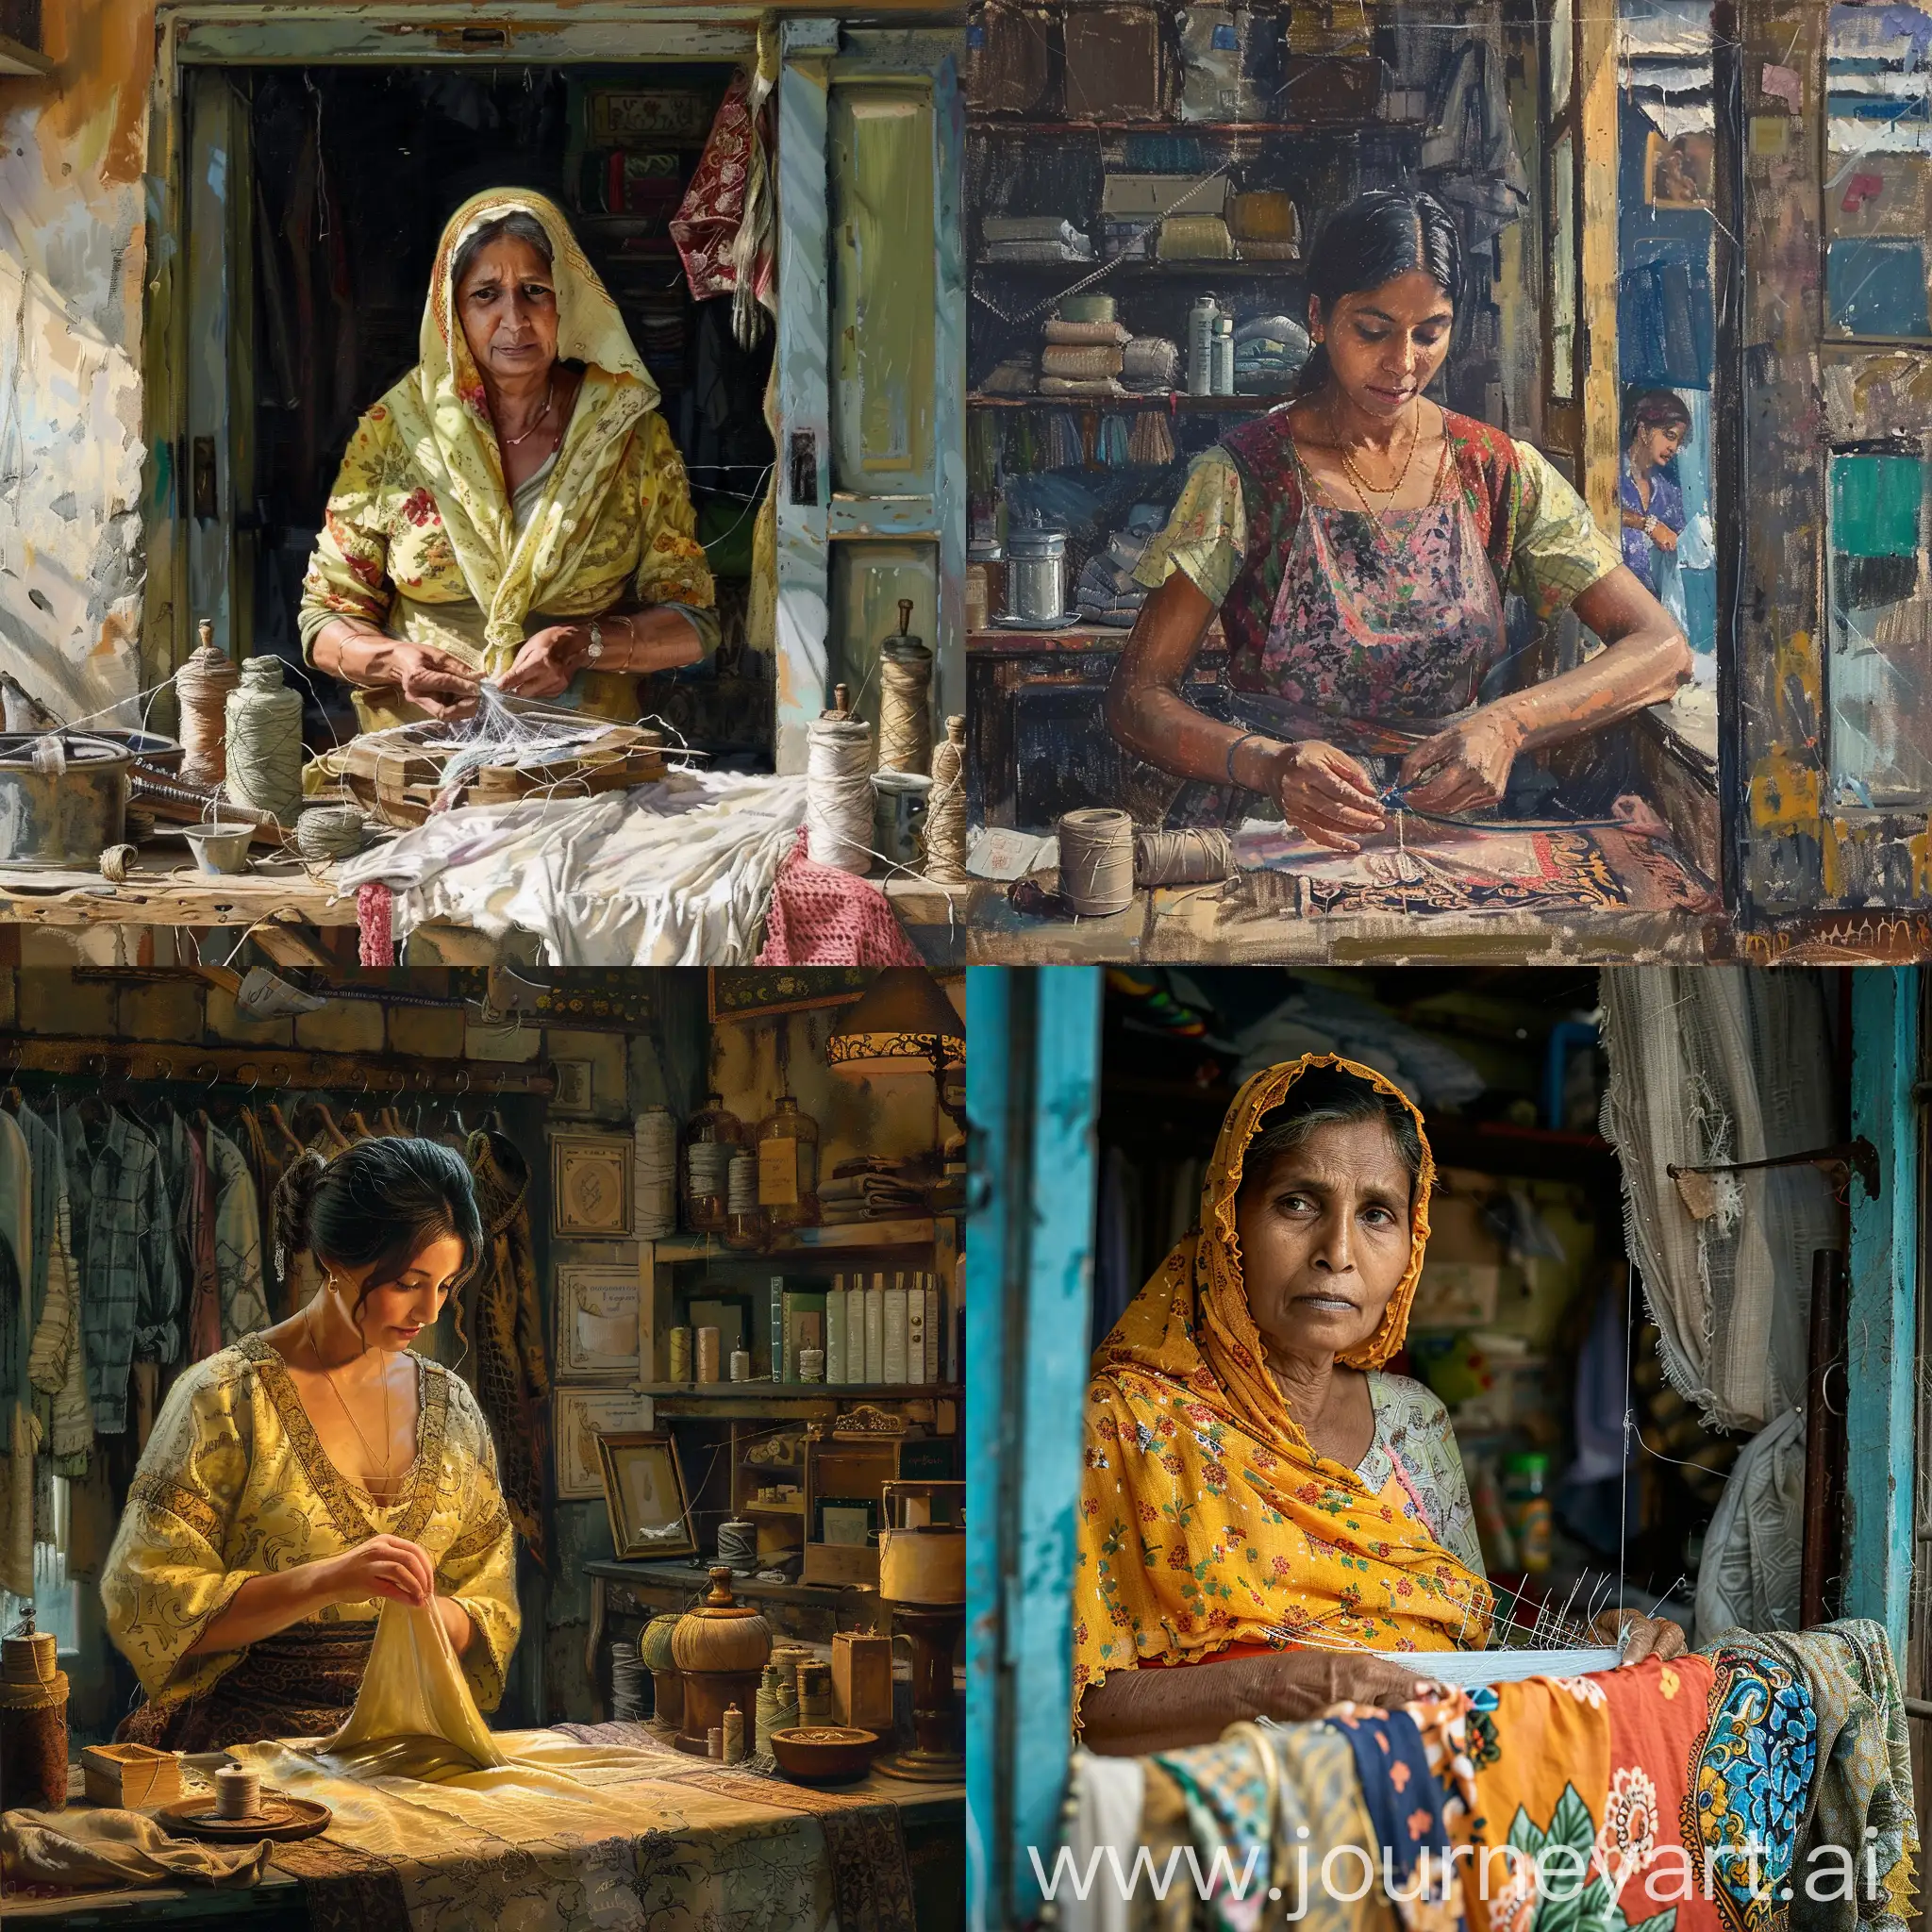 A tailor inside her shop sowing cloth